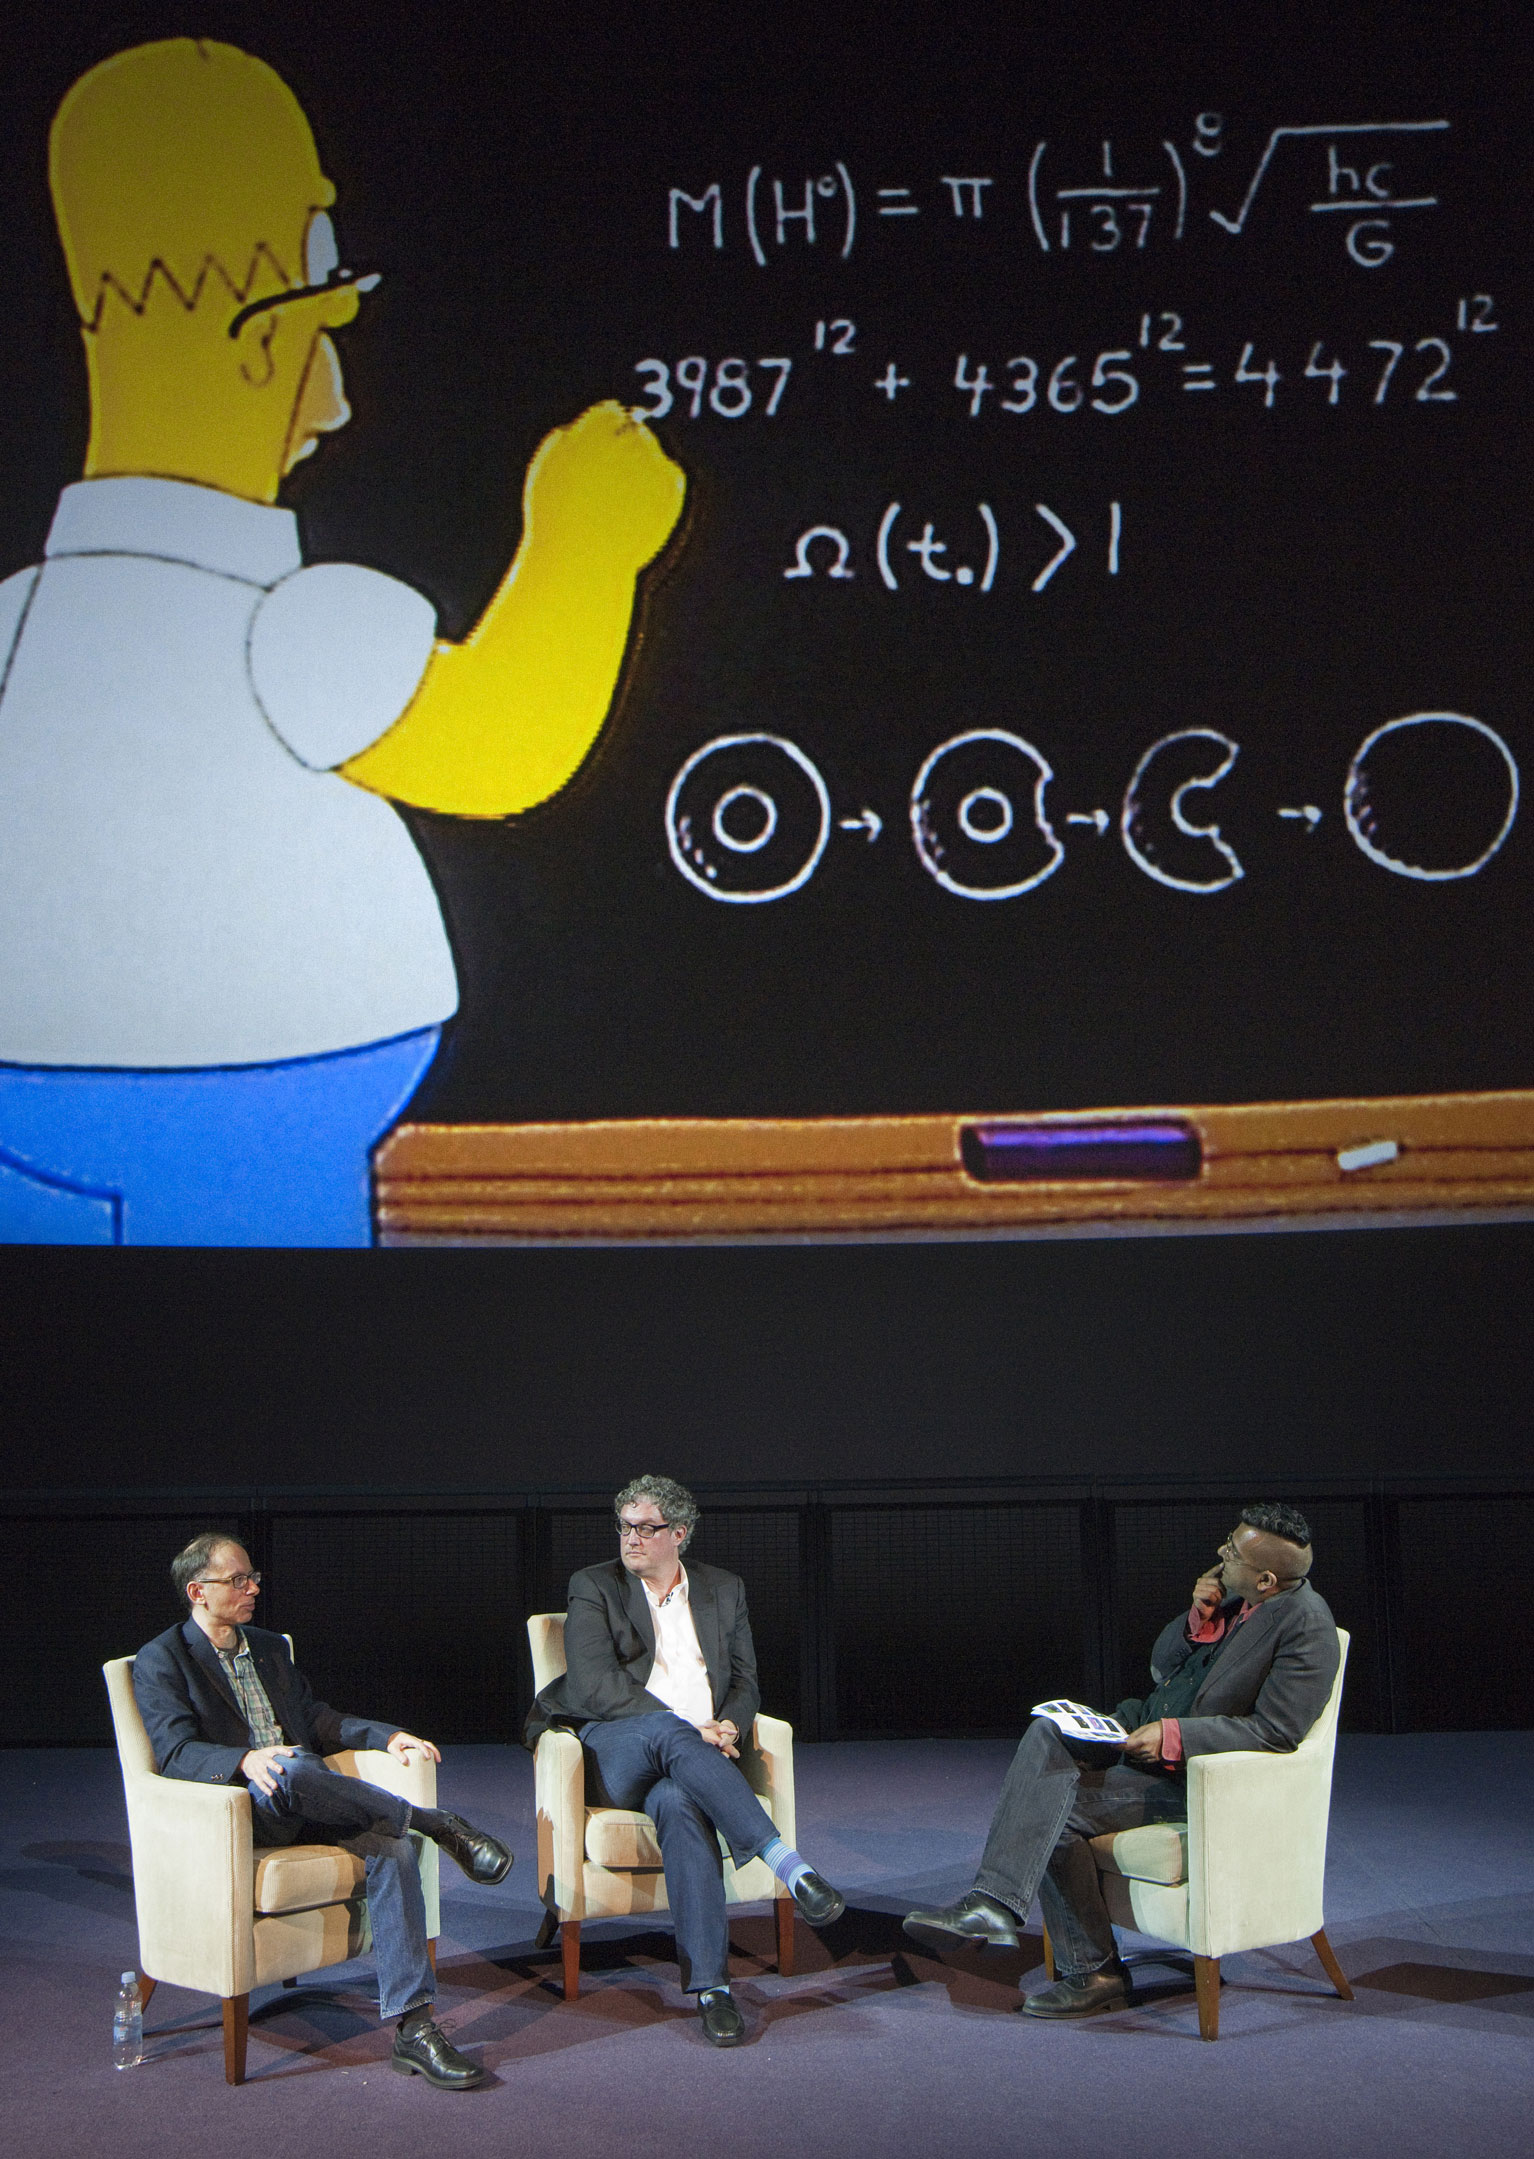 Al Jean and David X. Cohen discussing maths and The Simpsons at the Science Museum. Credit: Science Museum